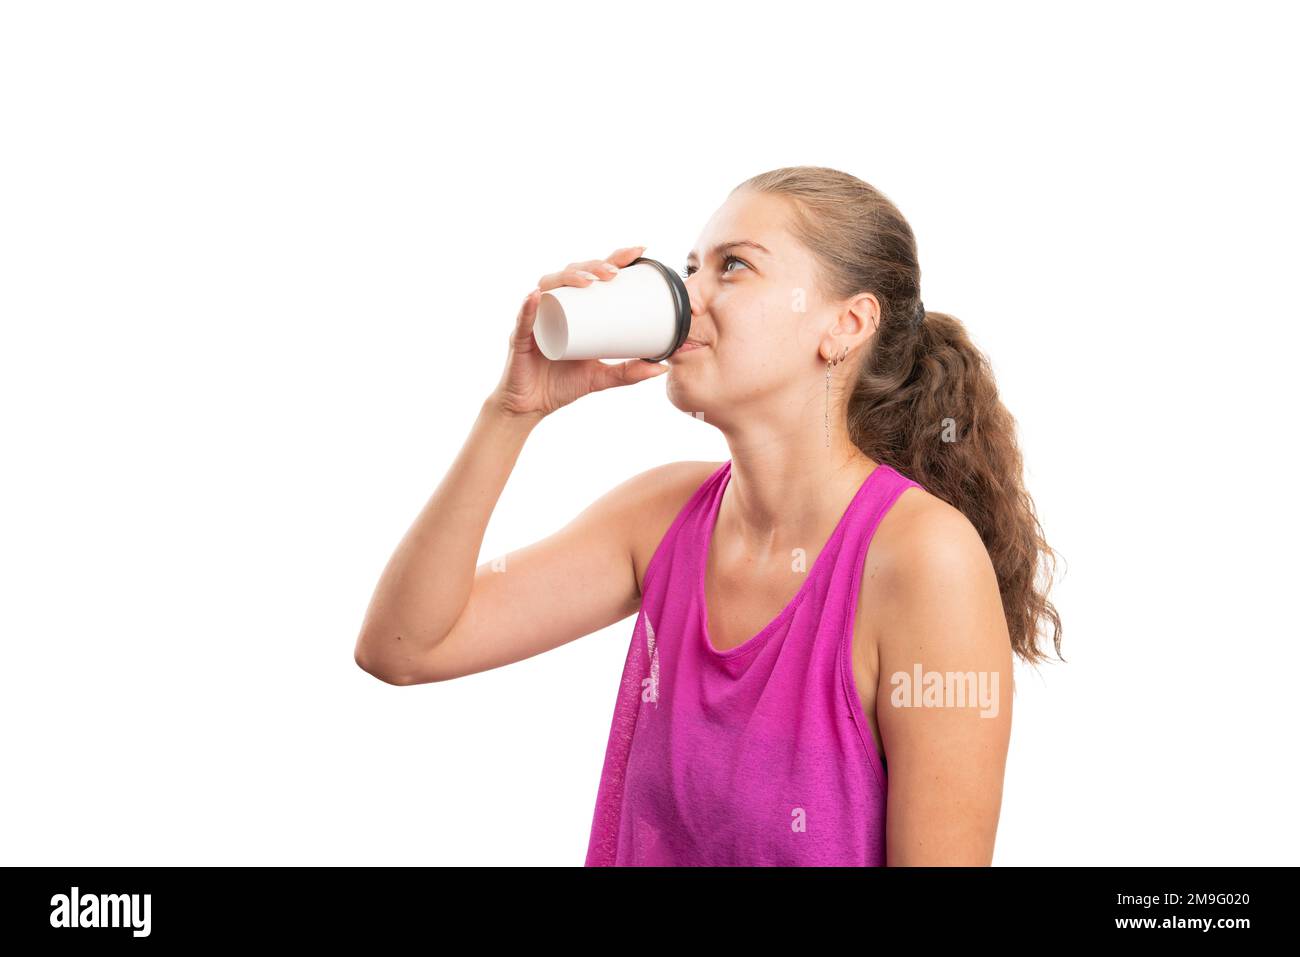 Adult female model wearing gym attire pink tanktop drinking coffee from paper cup as morning gym workout concept with blank copyspace for advertising Stock Photo